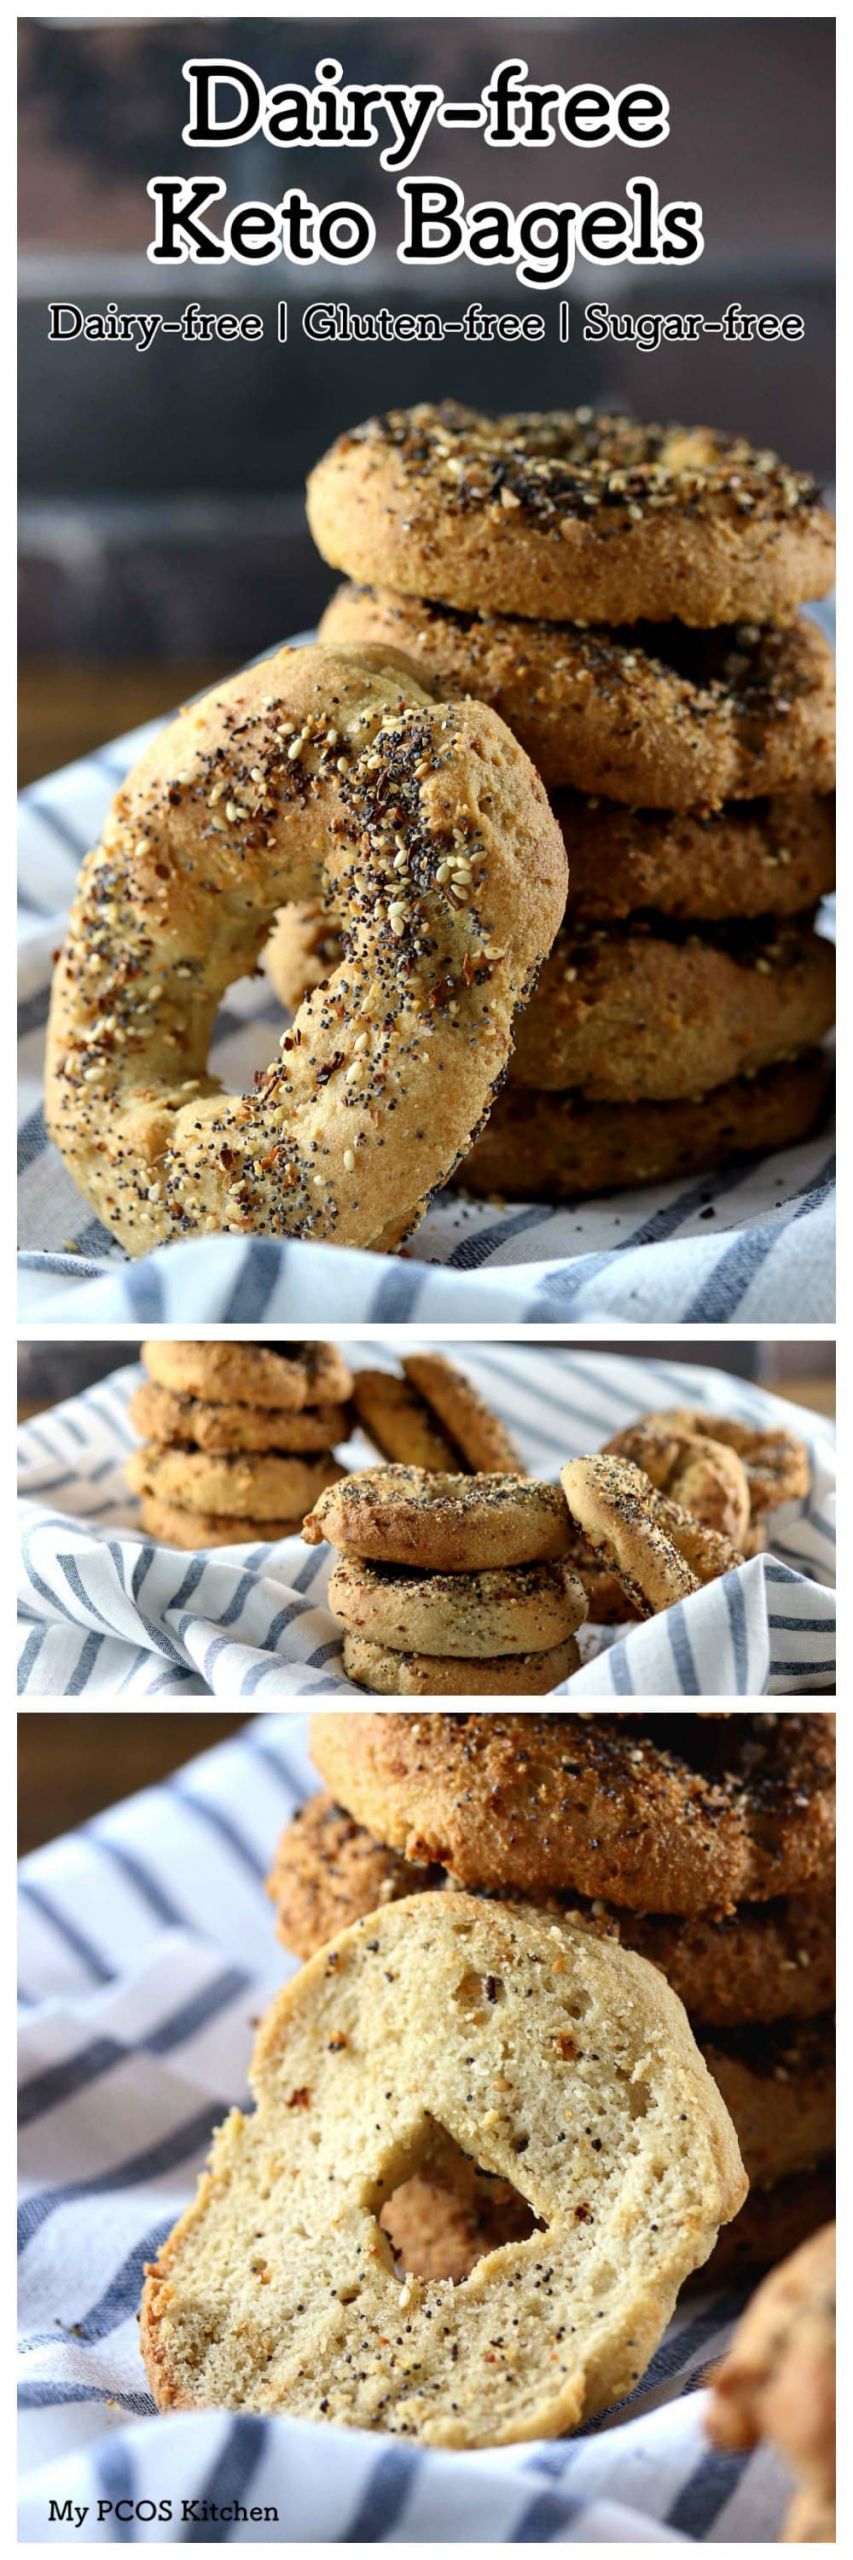 Dairy Free Keto Bagels
 Dairy free Keto Bagels Gluten free Low Carb My PCOS